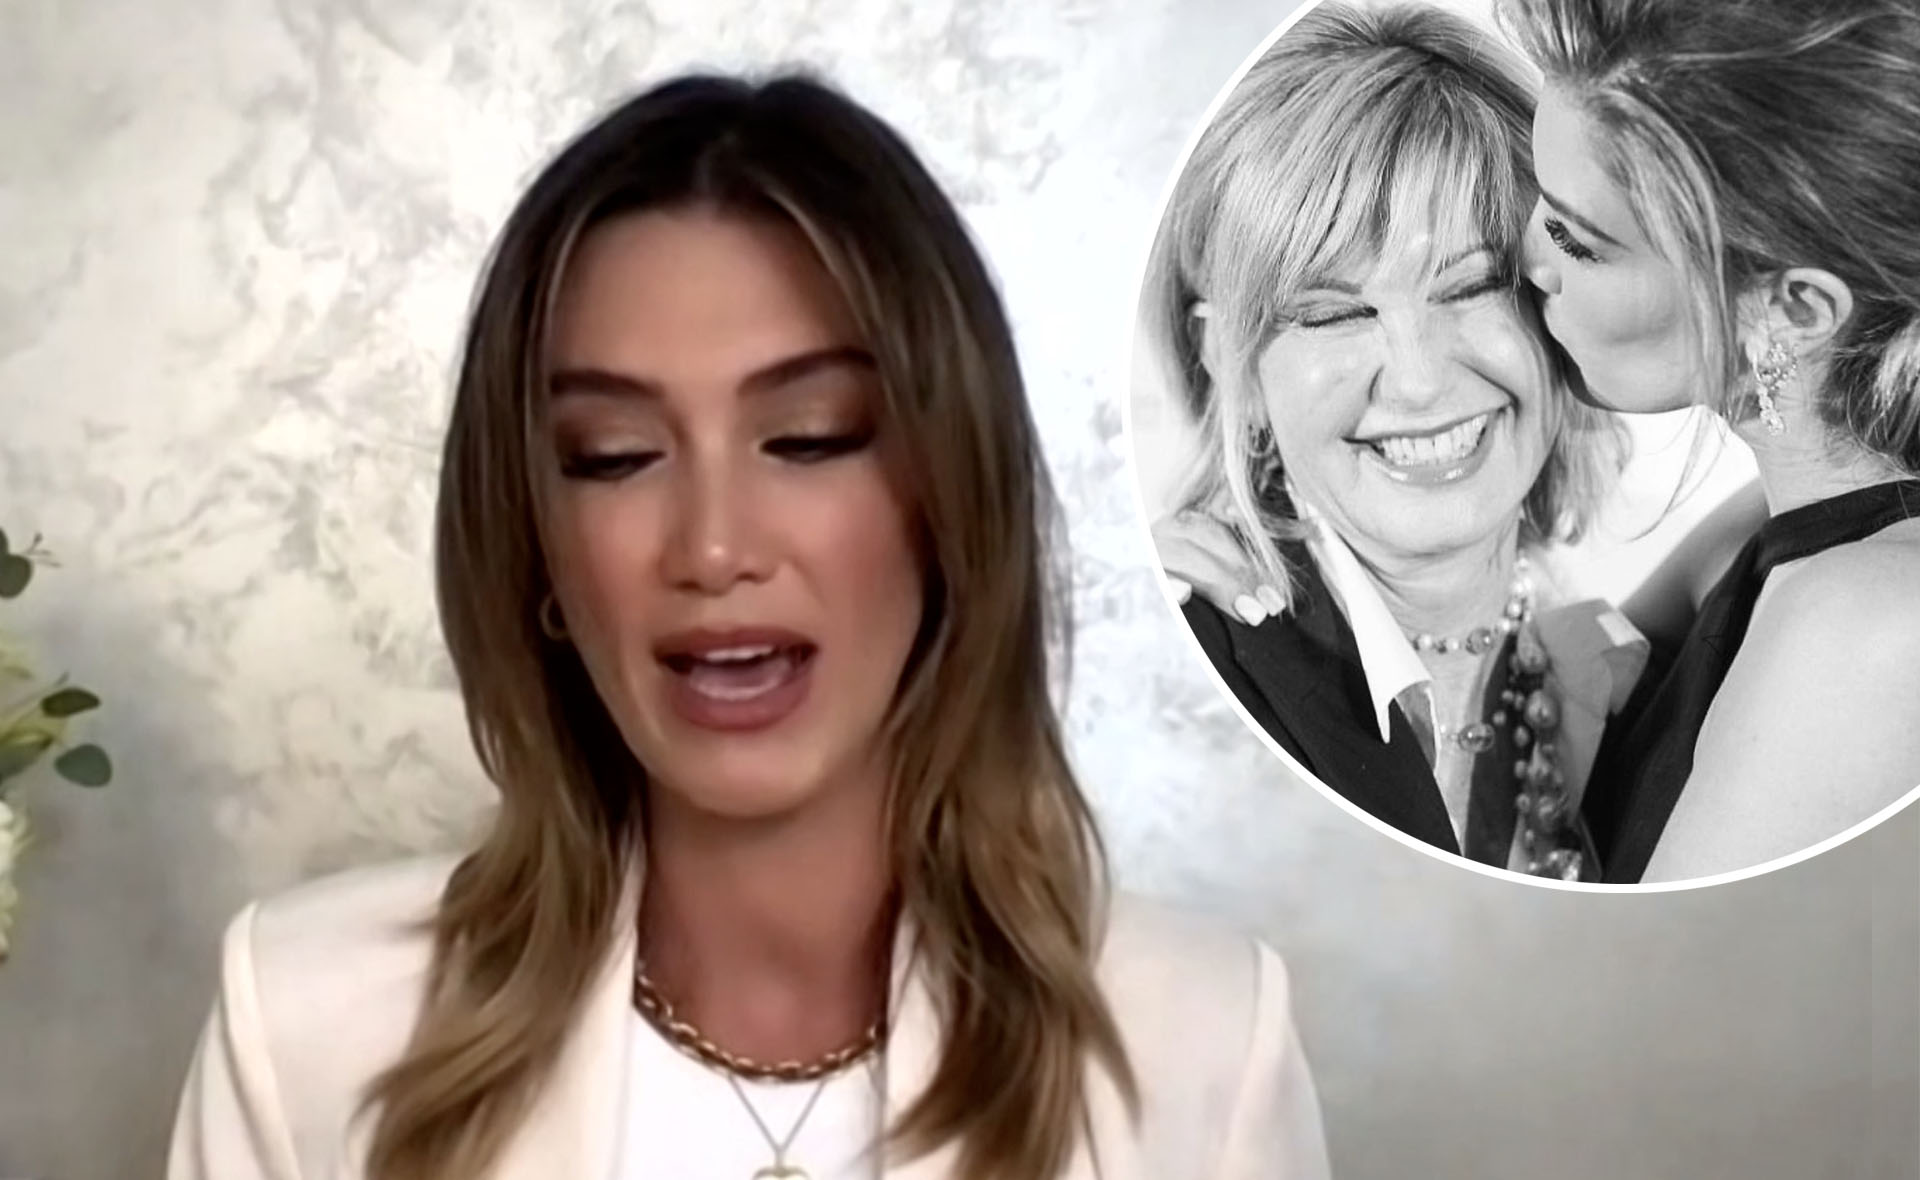 Delta Goodrem breaks into tears as she recalls her final contact with Olivia Newton-John on Sunrise